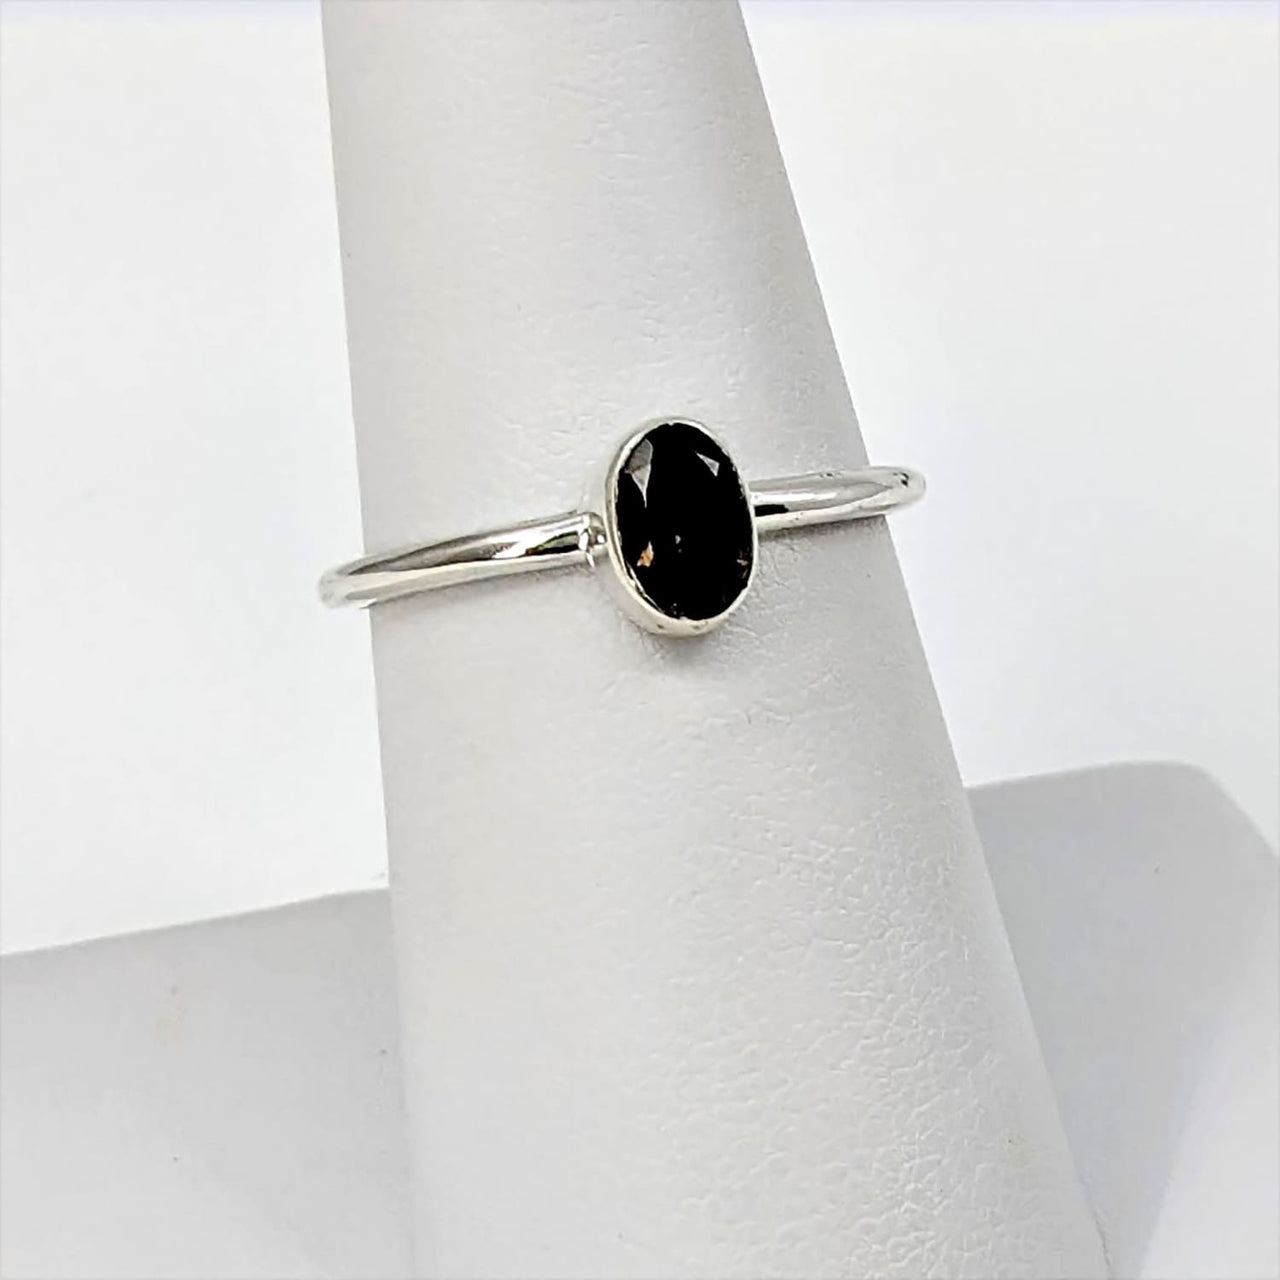 1 Smoky Quartz Dainty Stackable S.S. Ring #SK8903 - $36